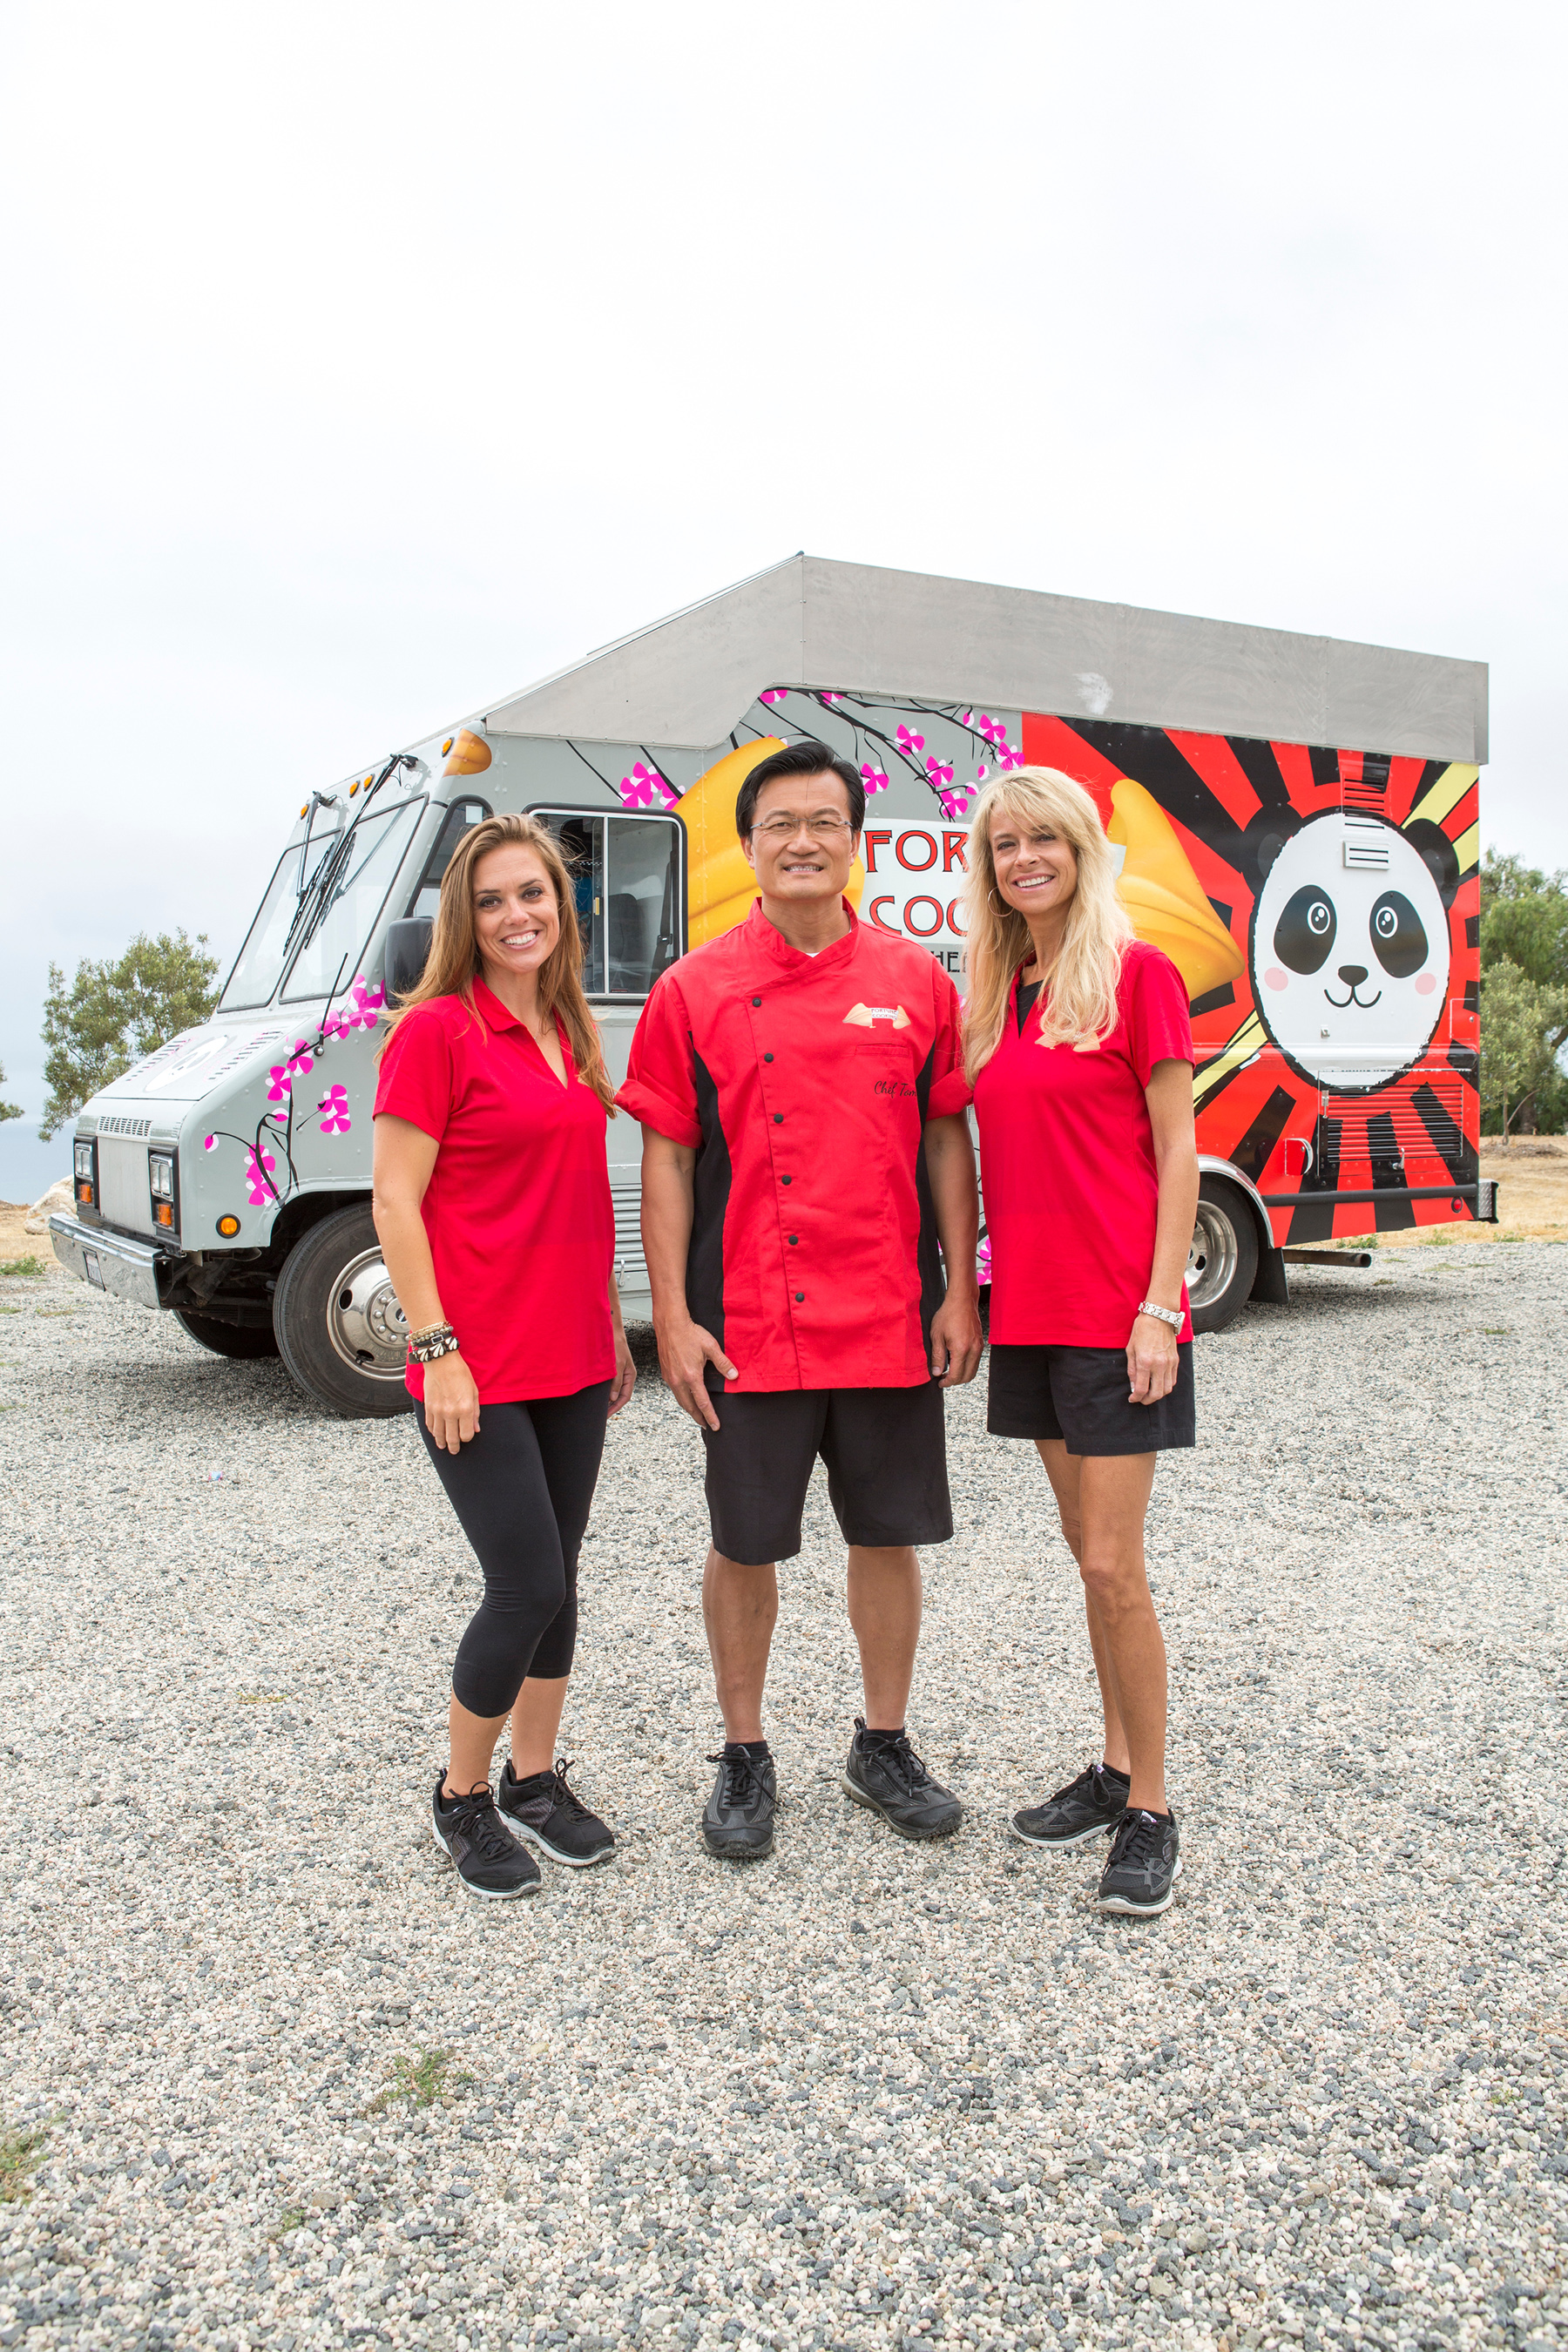 Team Fortune Cooking, Tiffany Webster, Tom Lin and Julie Hill-Lin, on Food Network's The Great Food Truck Race